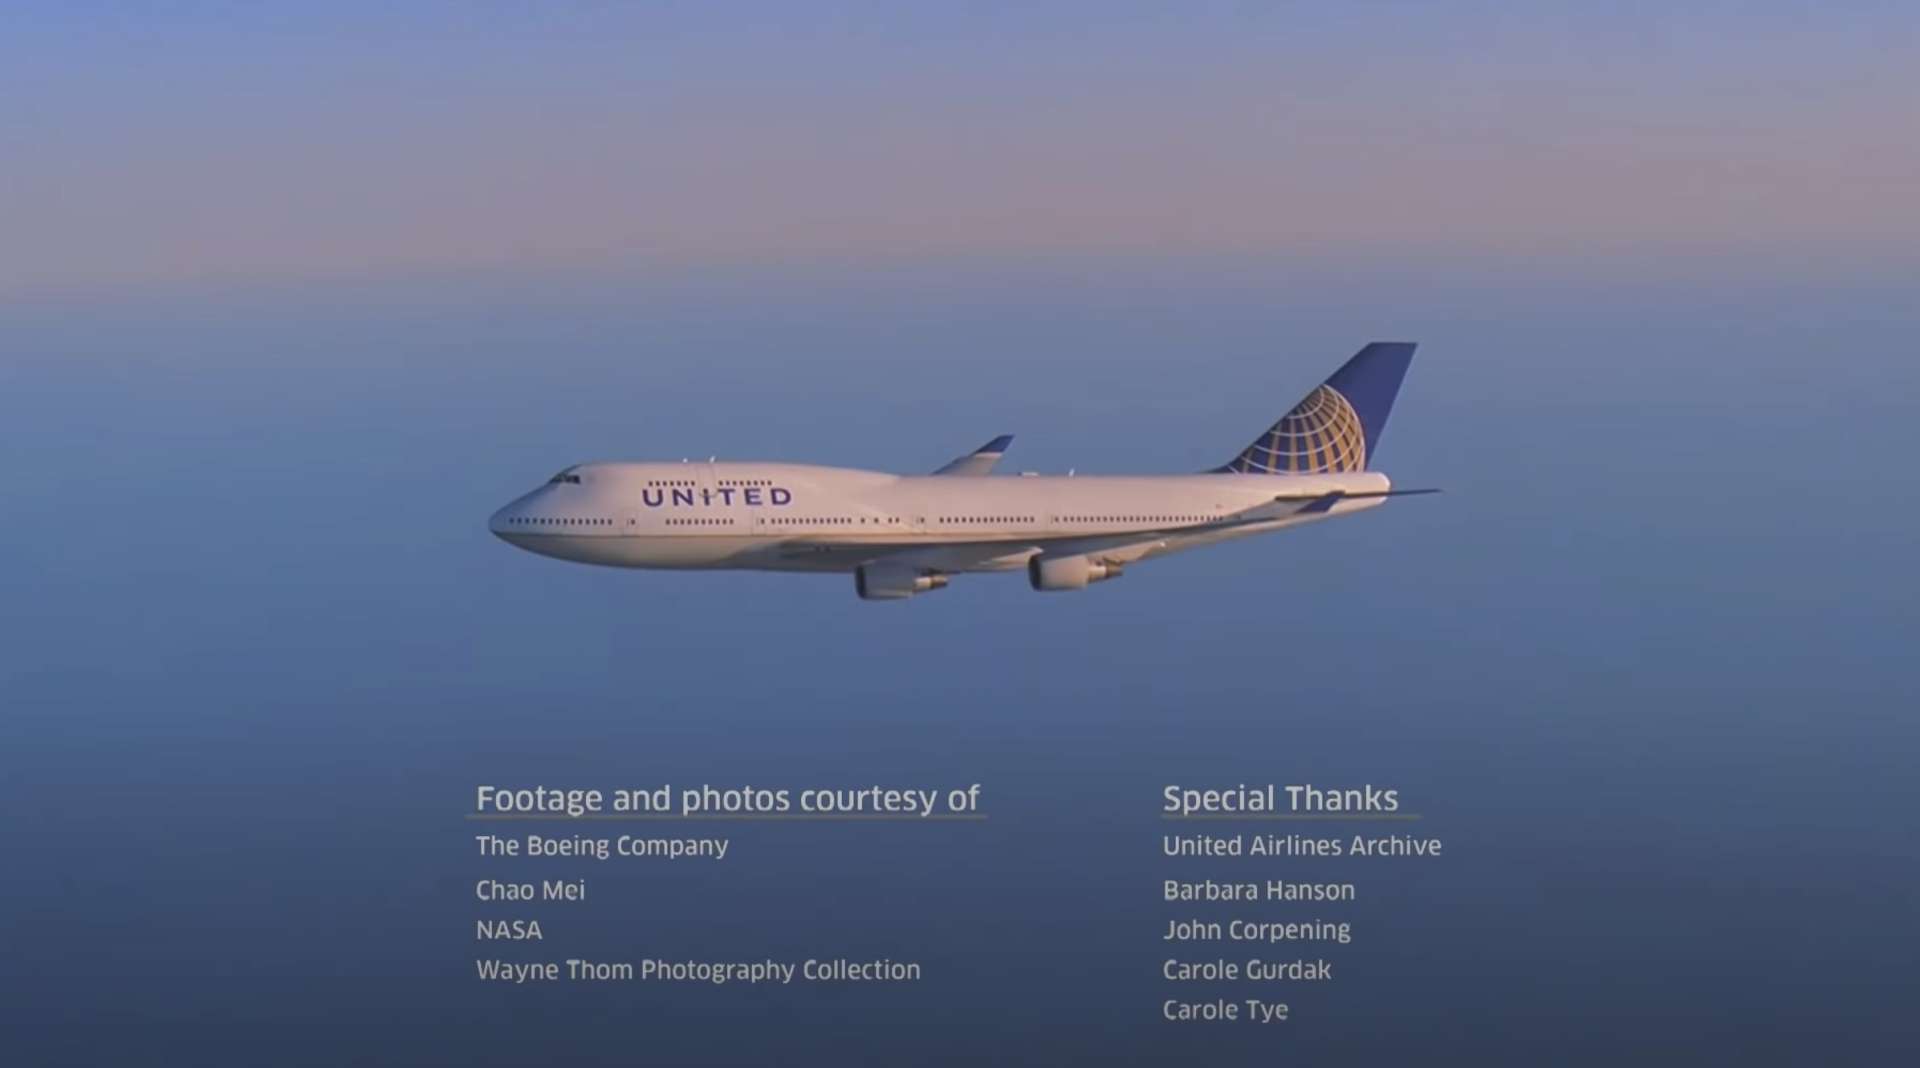 A Fond Farewell to our Boeing 747